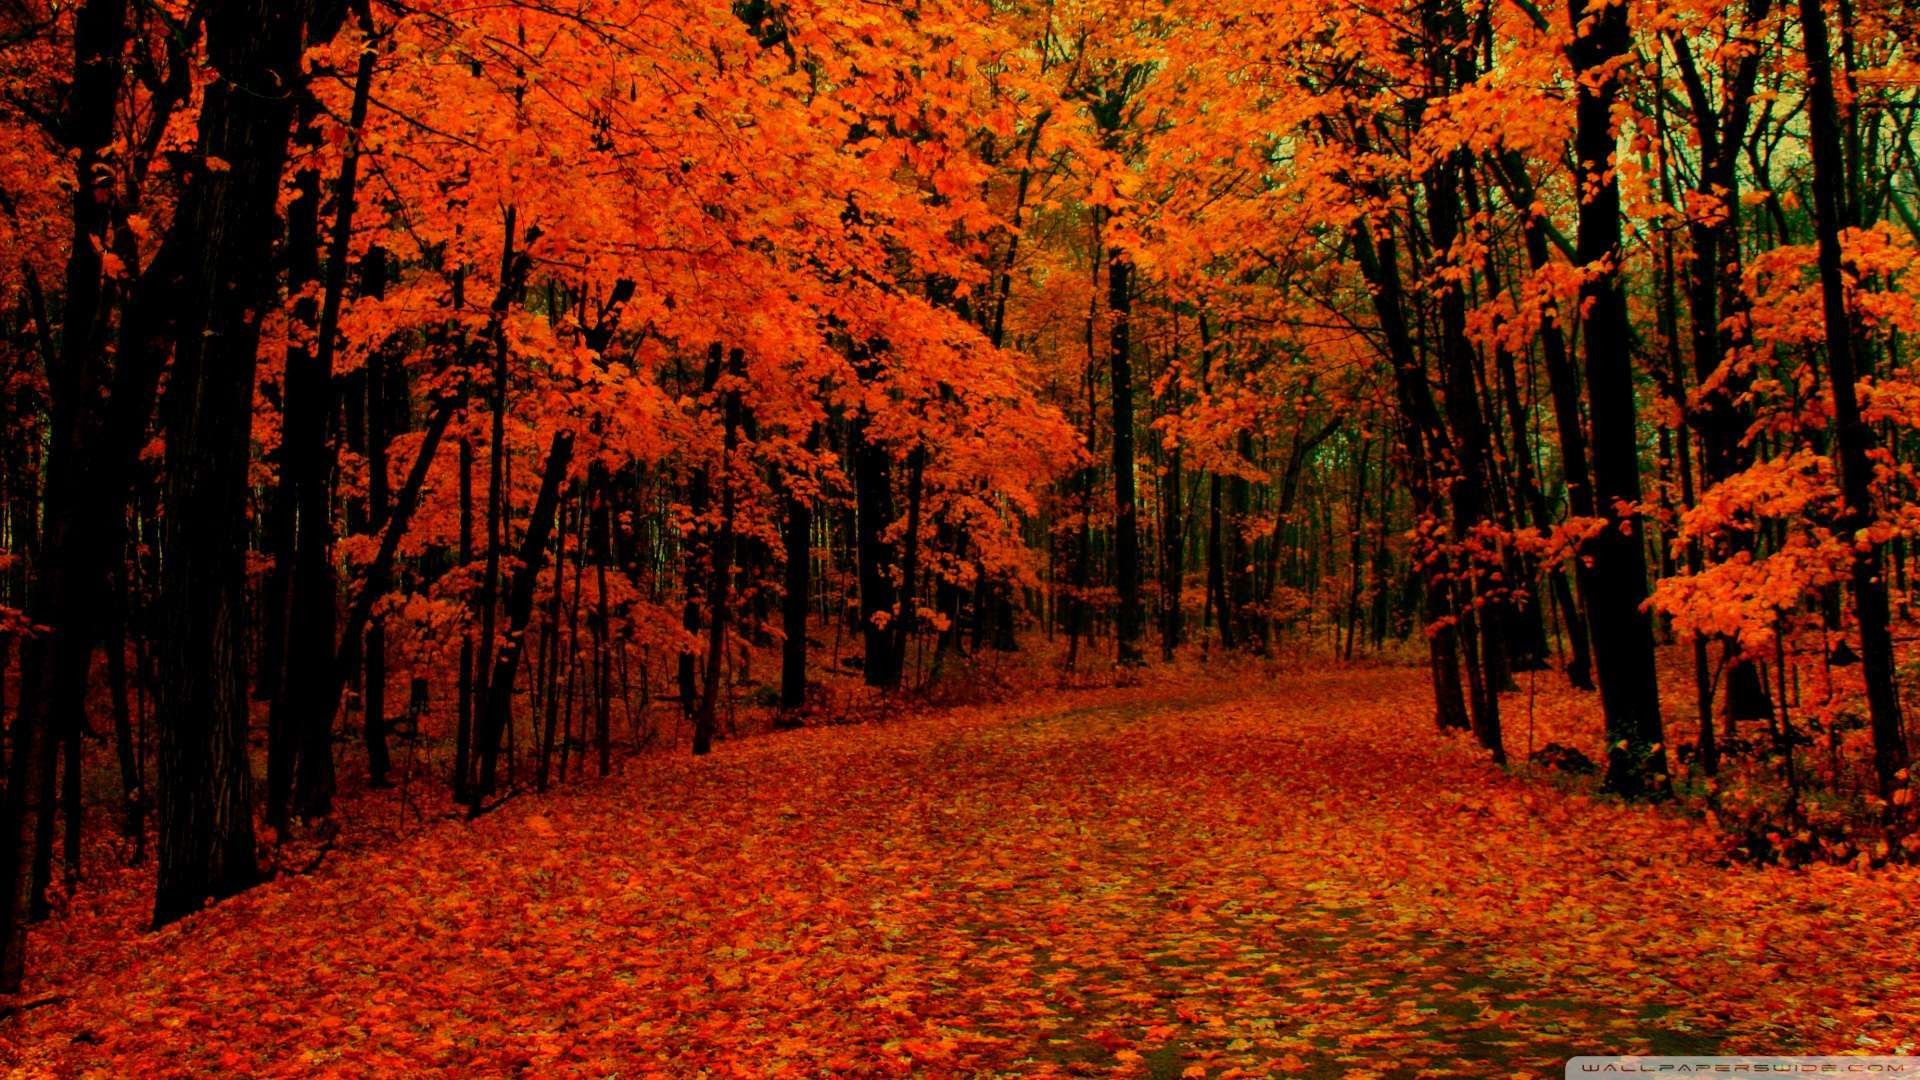 1920x1080 Wallpaper: Fall Path Wallpaper 1080p HD. Upload at February 2, 2014 by .